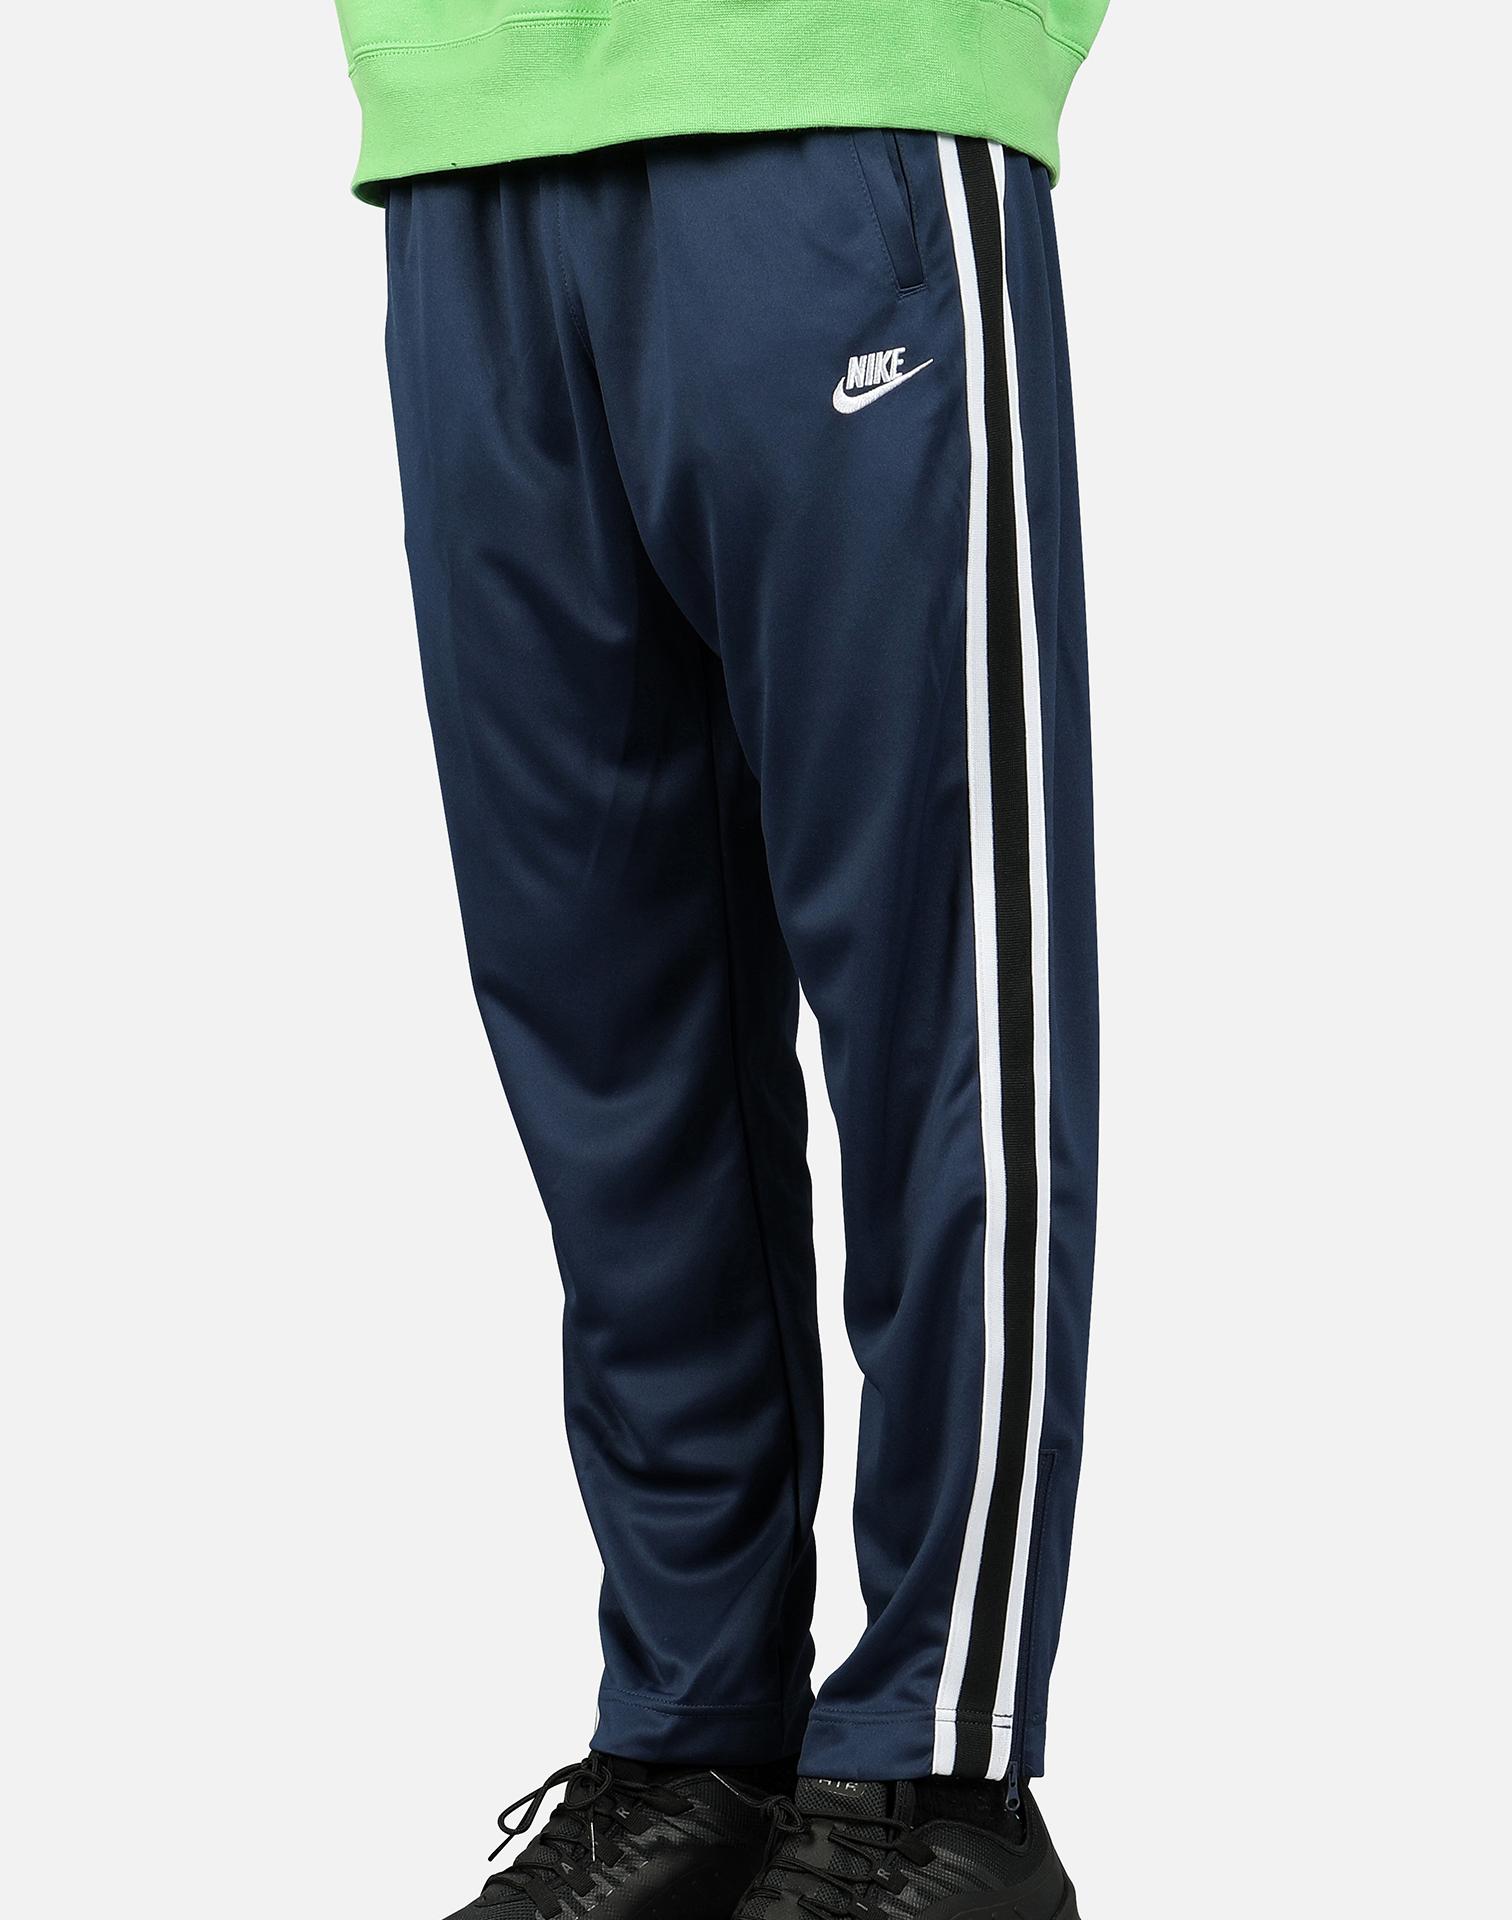 Nike Synthetic Nsw Tribute Oh JOGGER Pants in Navy (Blue) for Men - Lyst